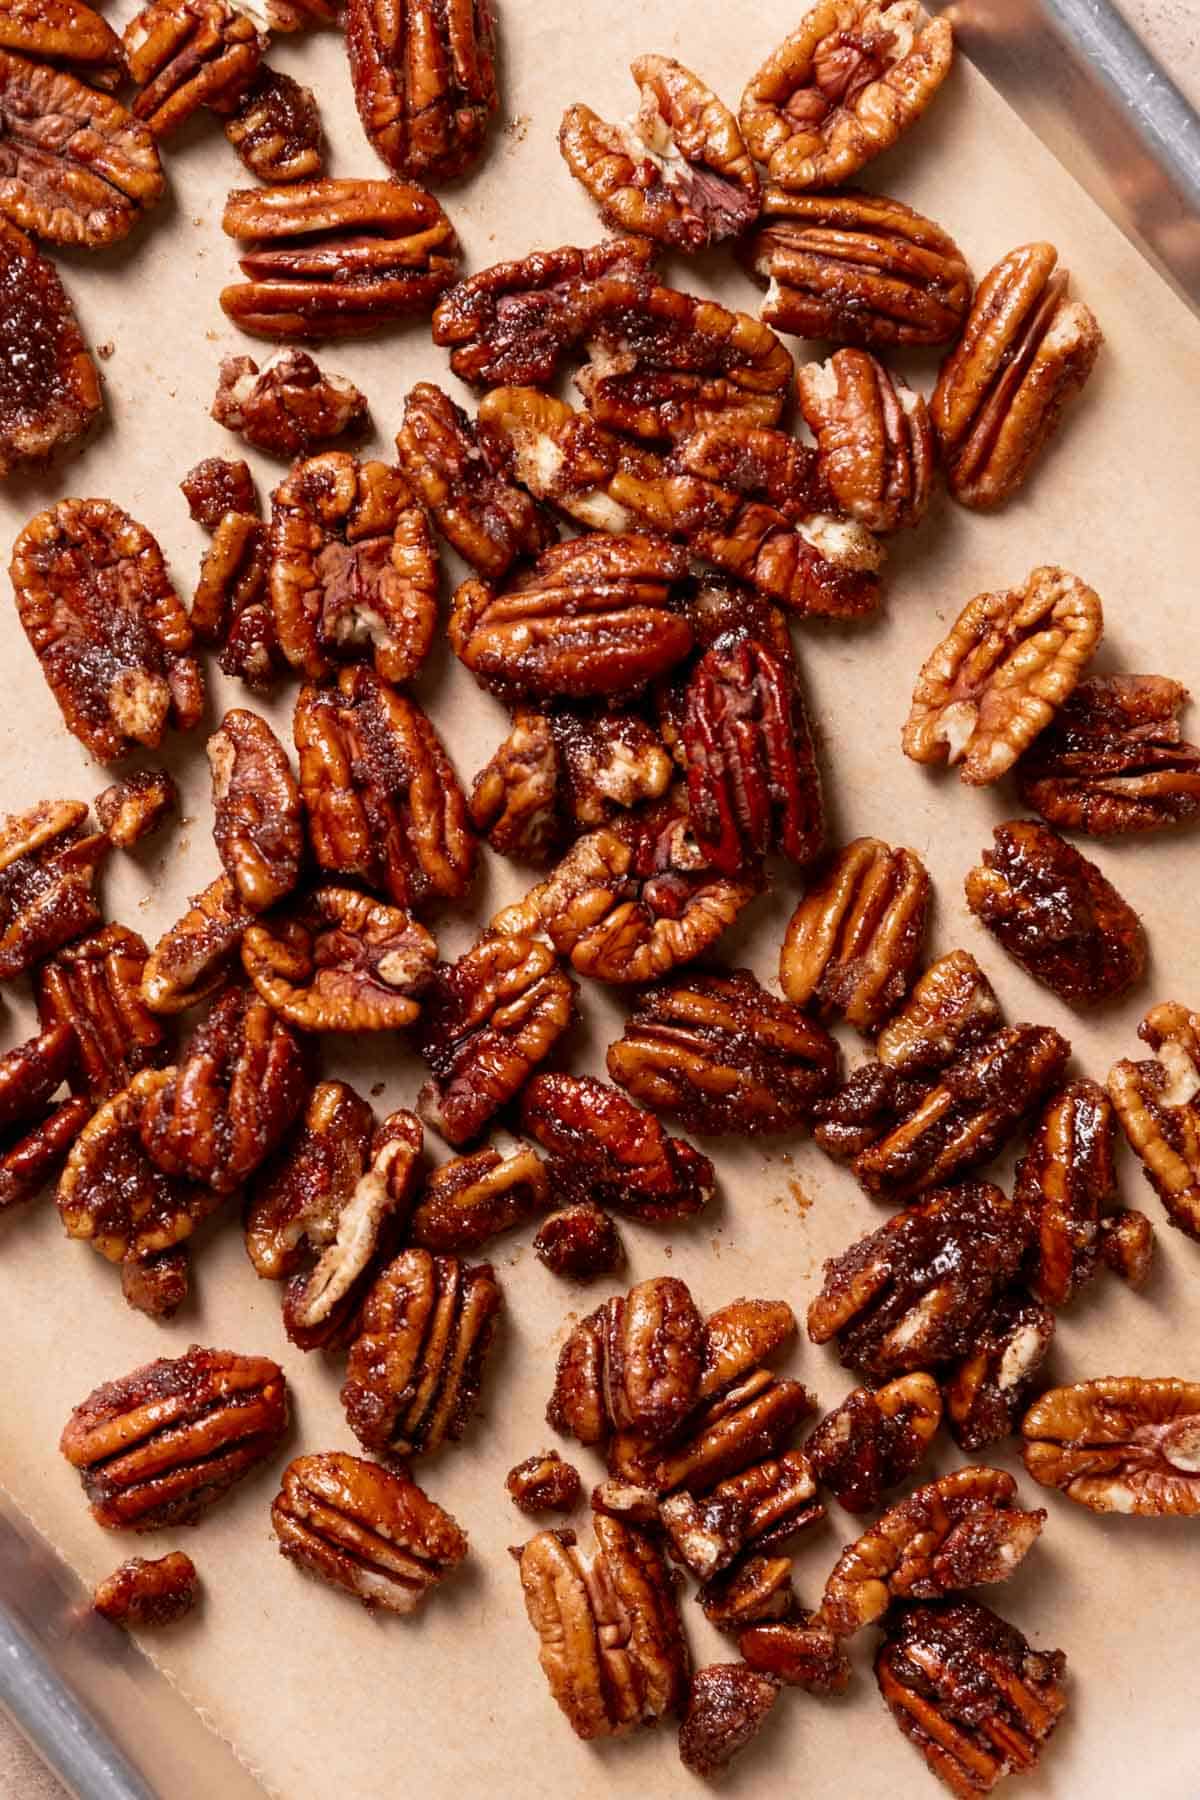 pecans tossed in butter, sugar, and cinnamon on a baking tray.